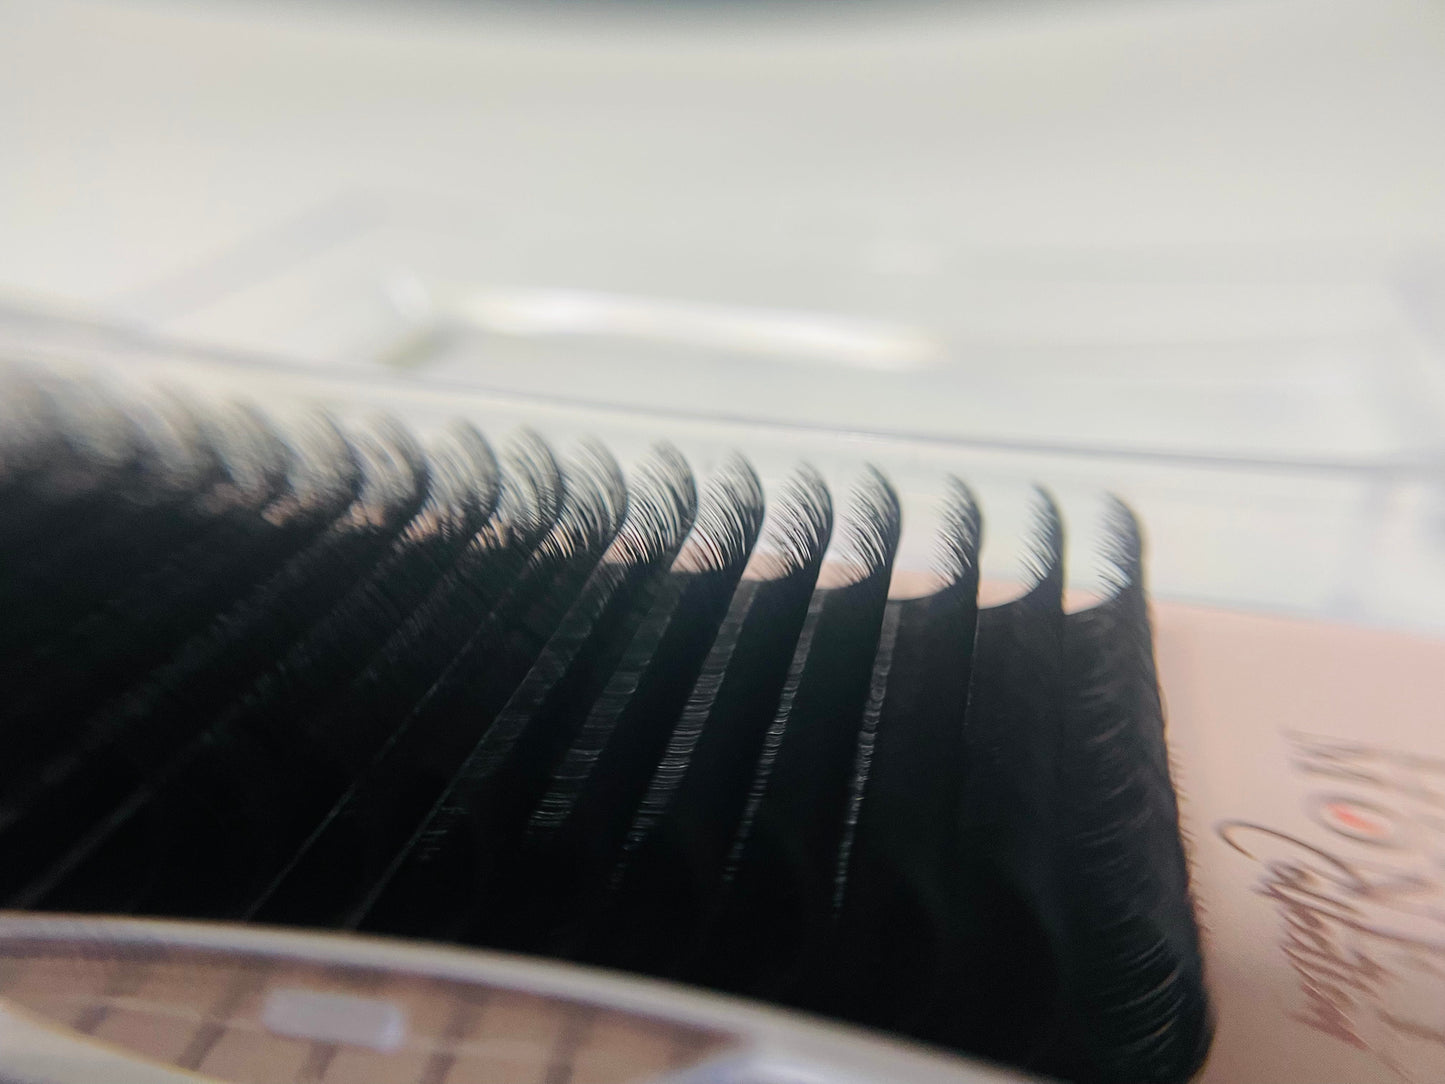 Flat Cashmere Lashes - 0.15 (0.07 weight) - Mixed Length Trays